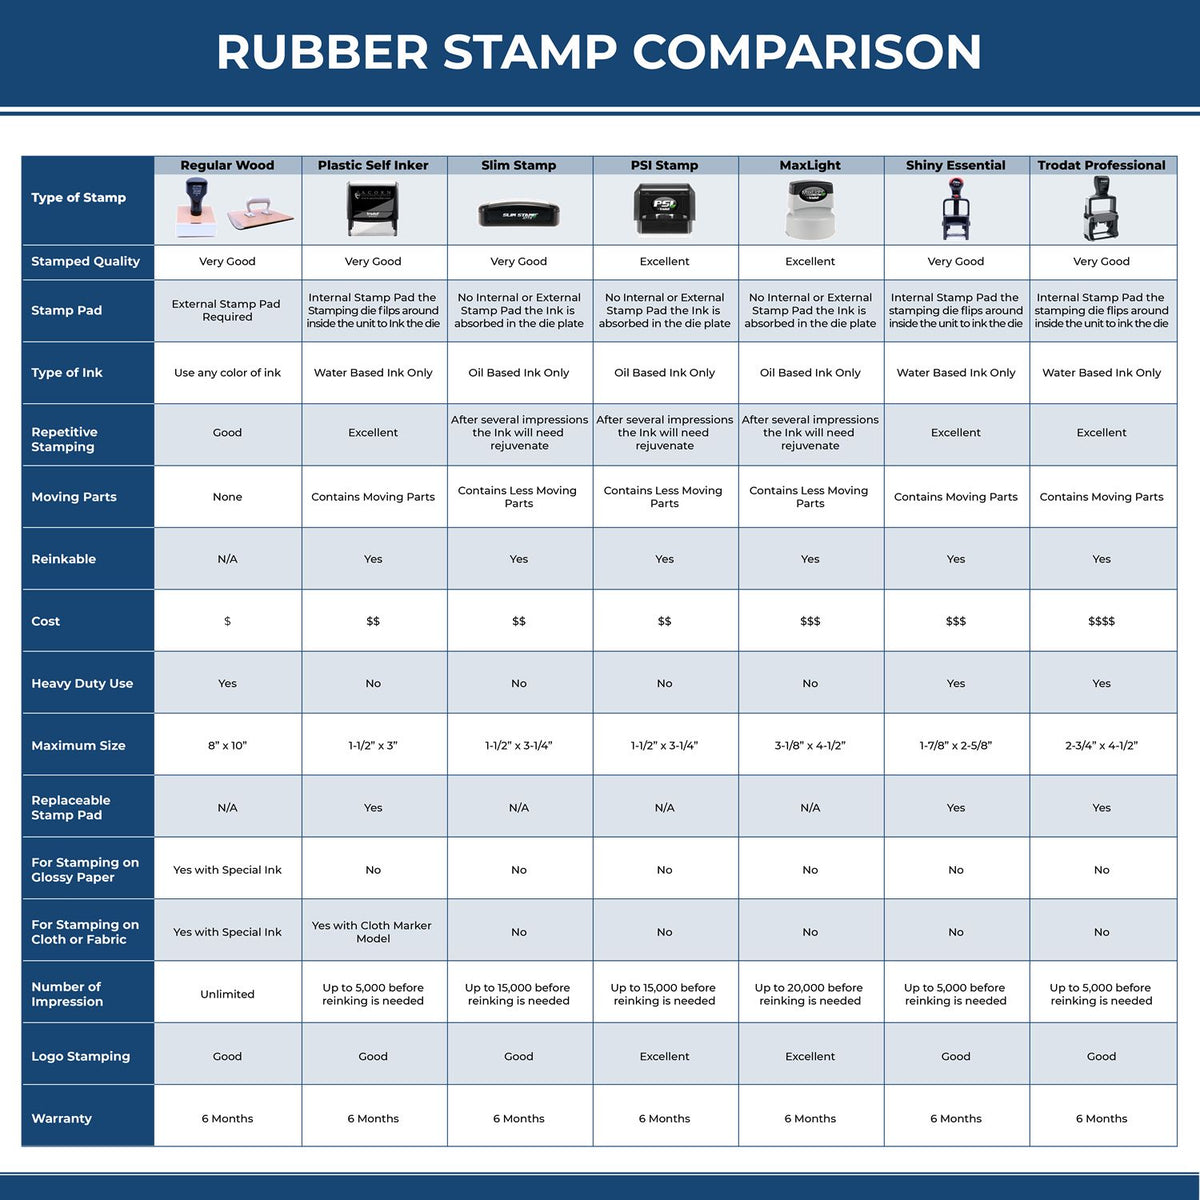 A comparison chart for the different types of mount models available for the Heavy-Duty Indiana Rectangular Notary Stamp.